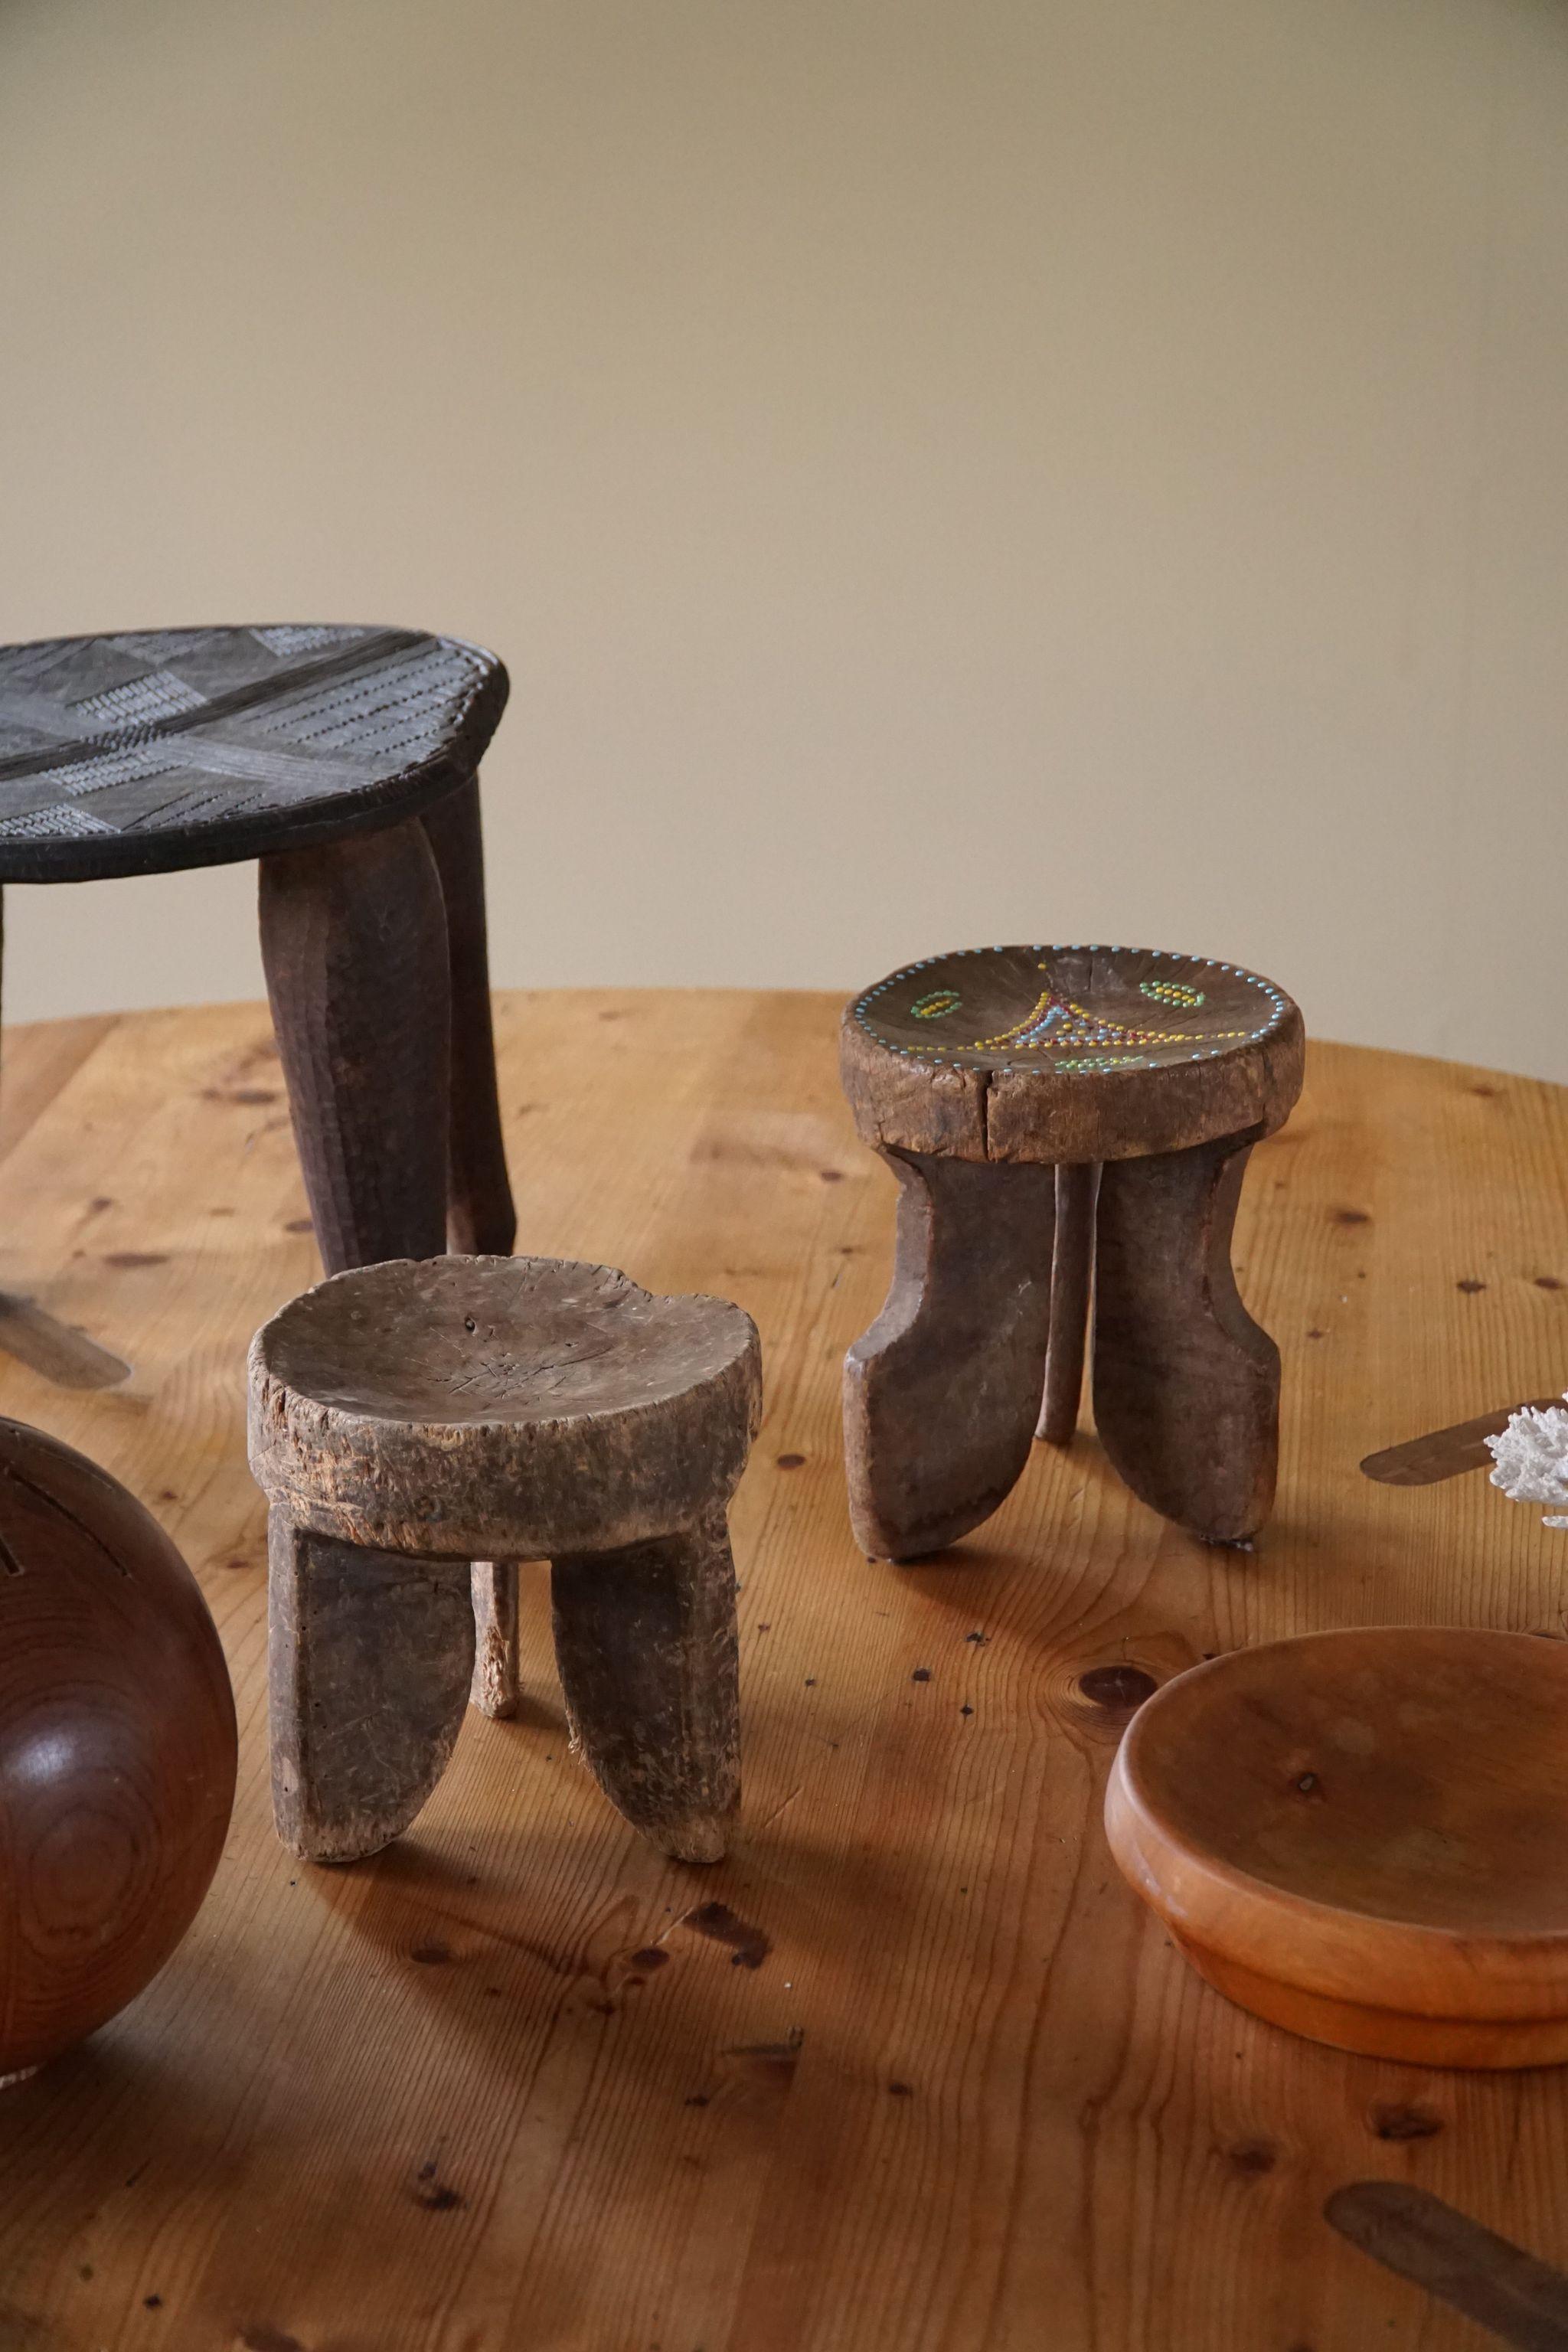 A fabulous pair of hand carved wooden Kamba stools. Made by a tribe in Nigeria, 1960s. A unique design making it a one-of-a-kind piece for your home.

A beautiful wabi sabi object with a fine patina. Perfect as functional side table or decorative